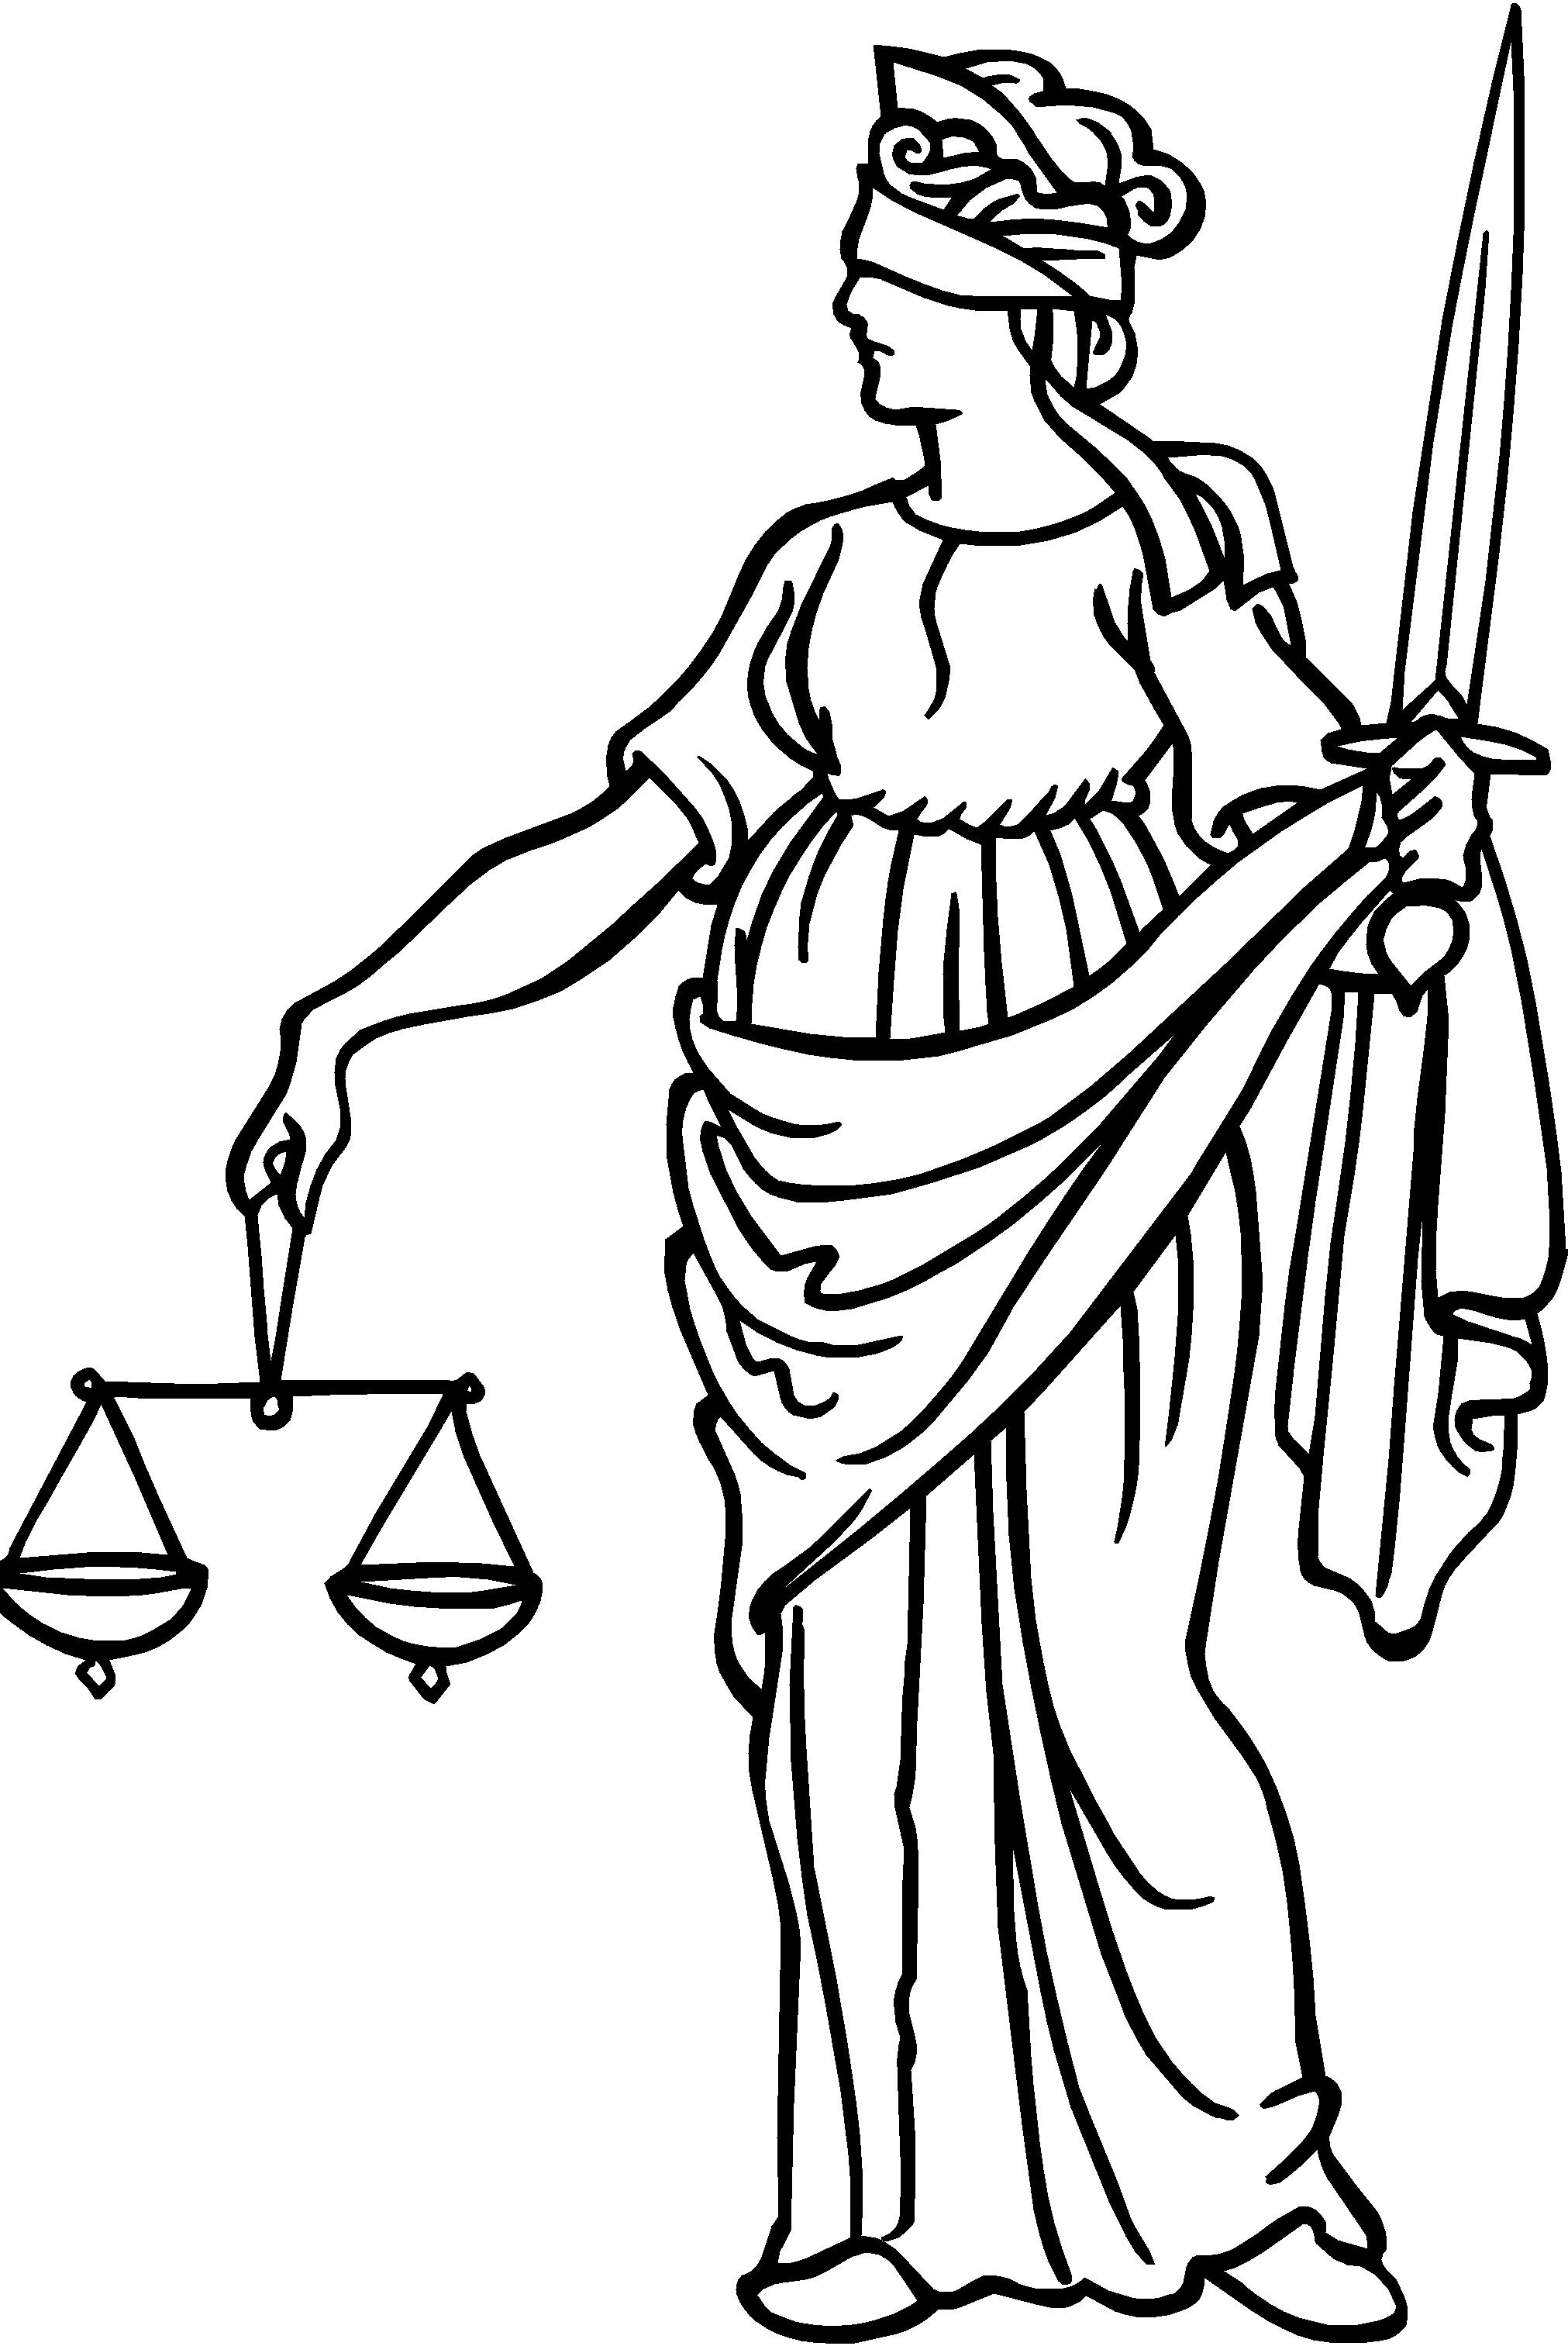 Lady Justice Vector - ClipArt Best